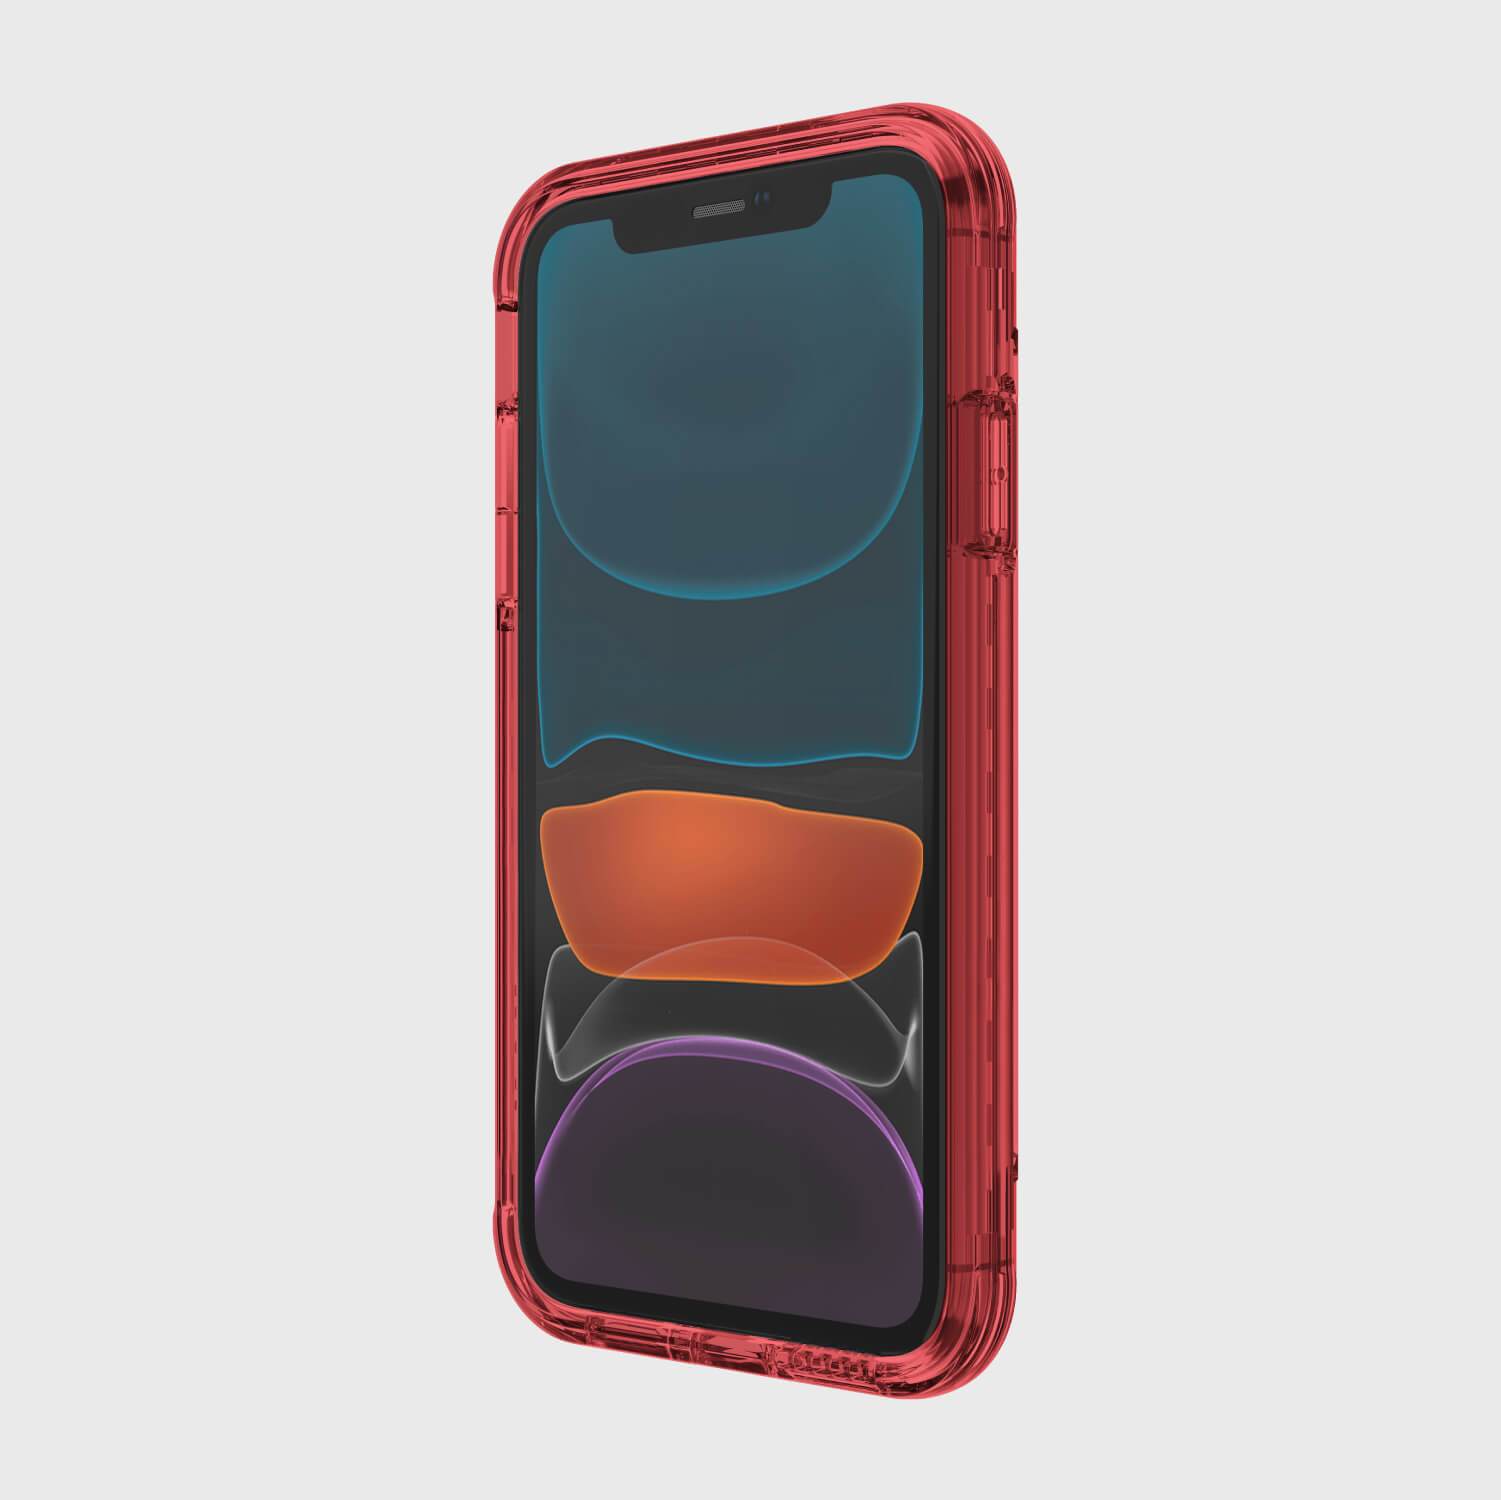 The iPhone 11 Pro case (AIR) by Raptic in red offers drop protection.